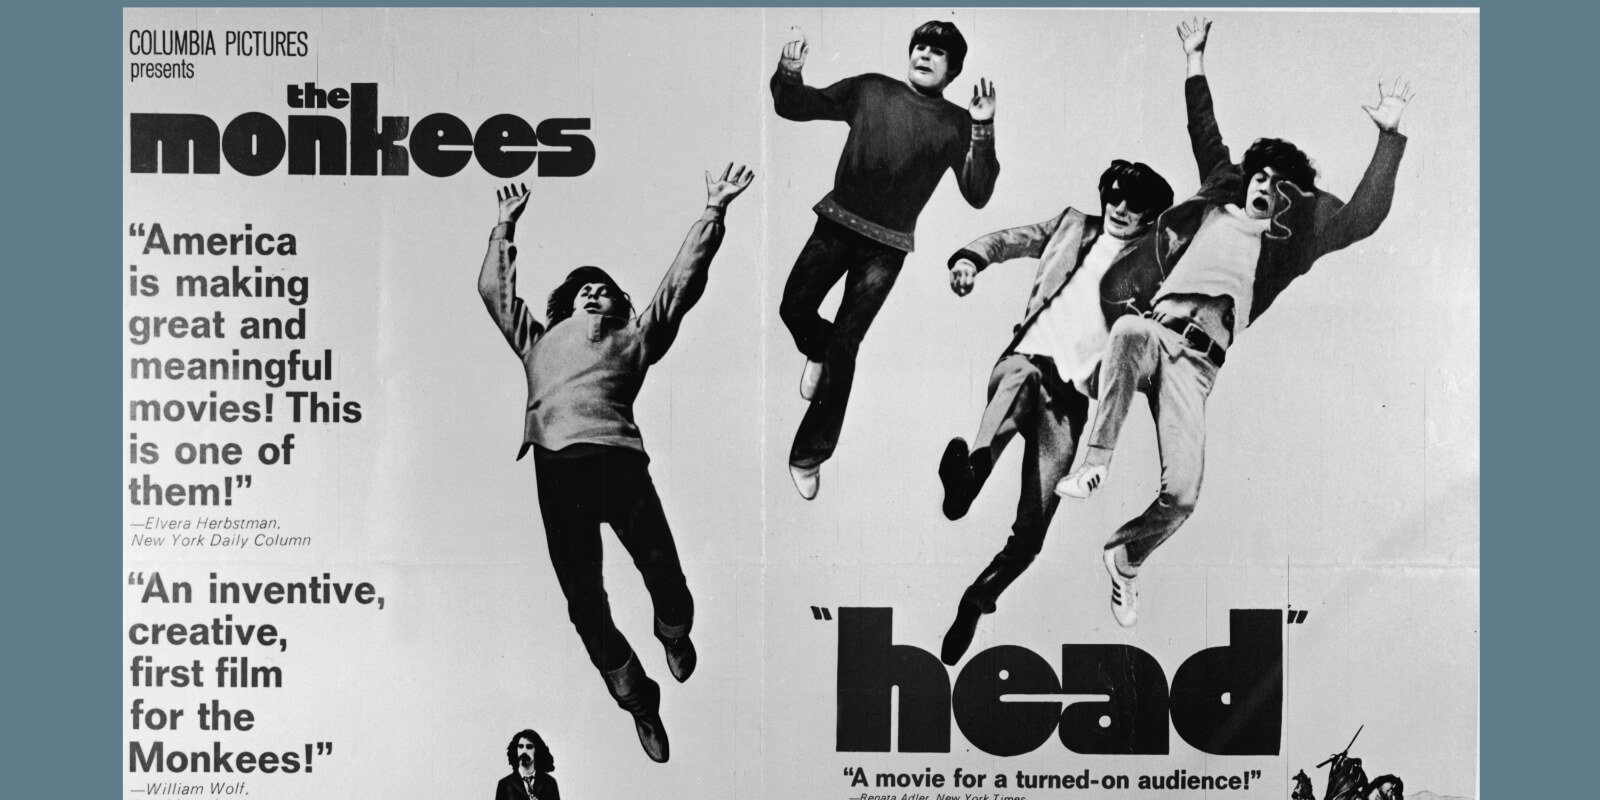 Movie poster for The Monkees film 'Head' released in 1968.